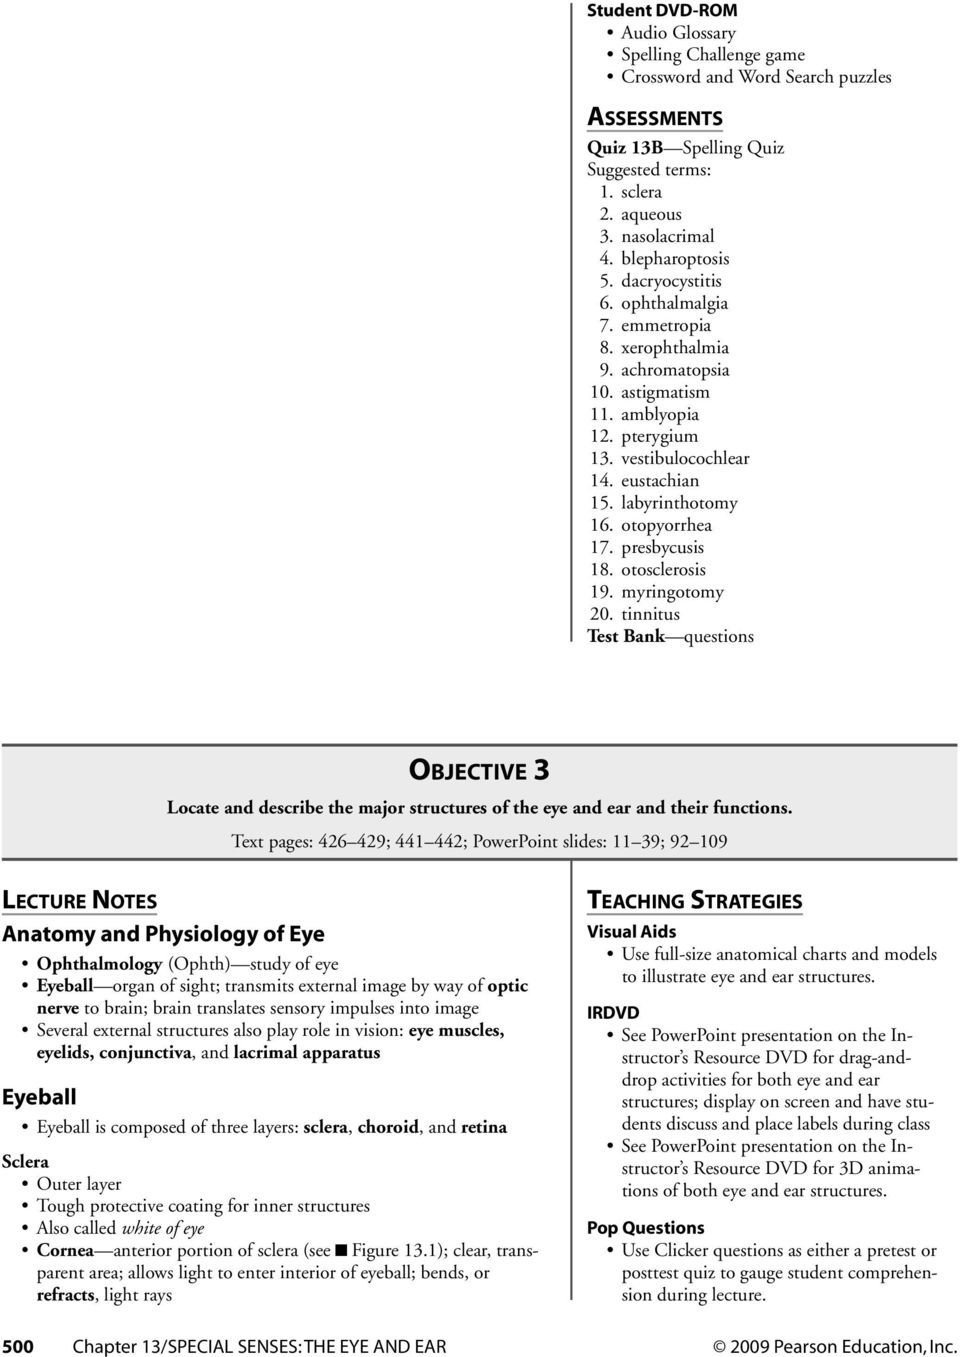 Comprehending Anatomy And Physiology Terminology Worksheet Answers